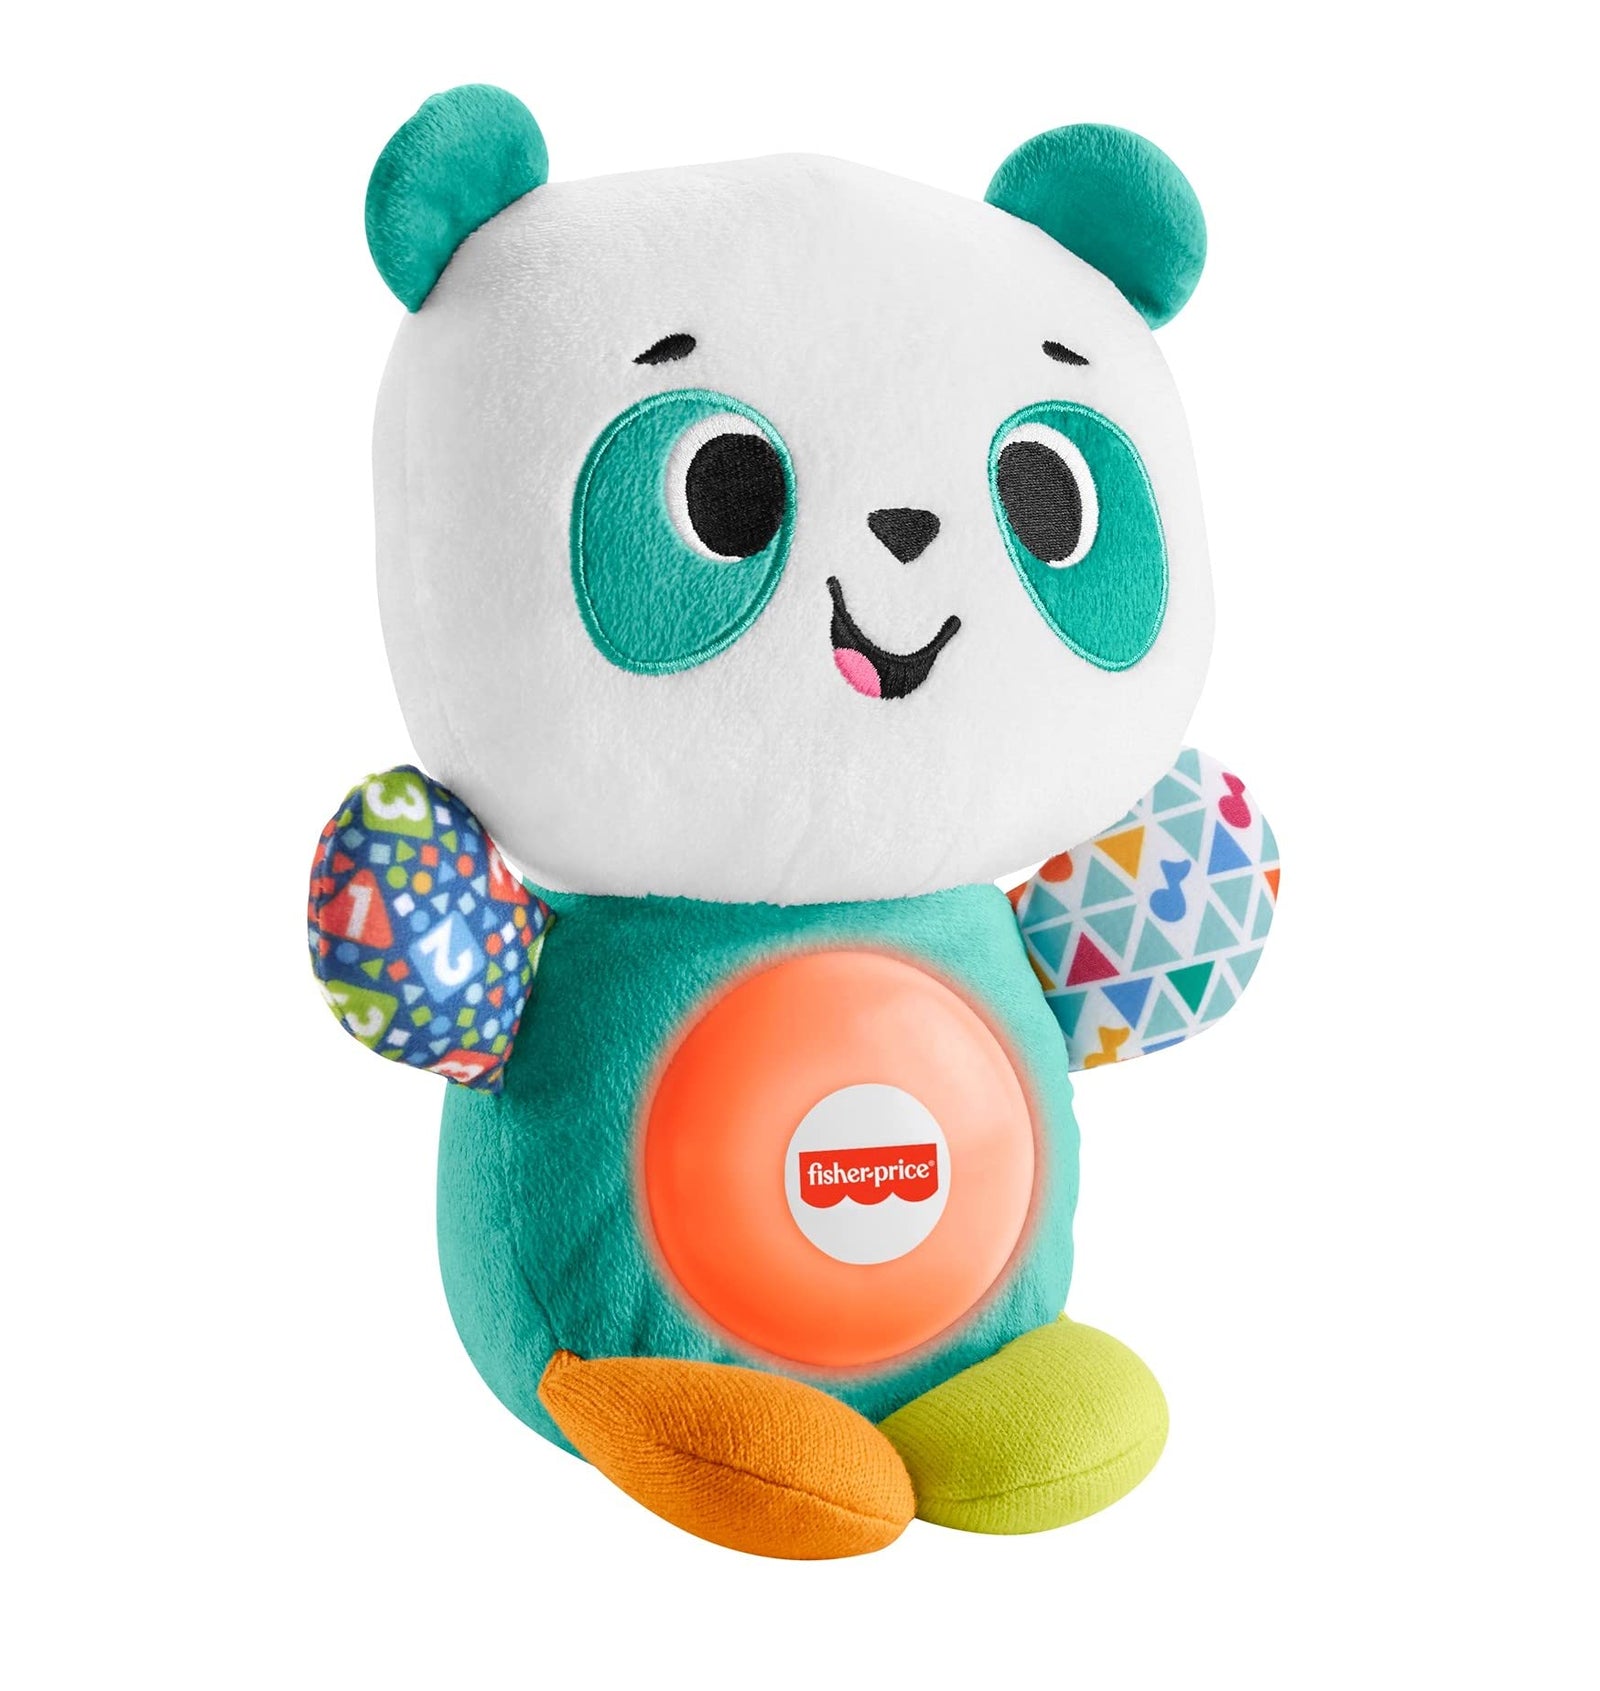 Fisher-Price Linkimals Play Together Panda, musical learning plush toy for babies and toddlers